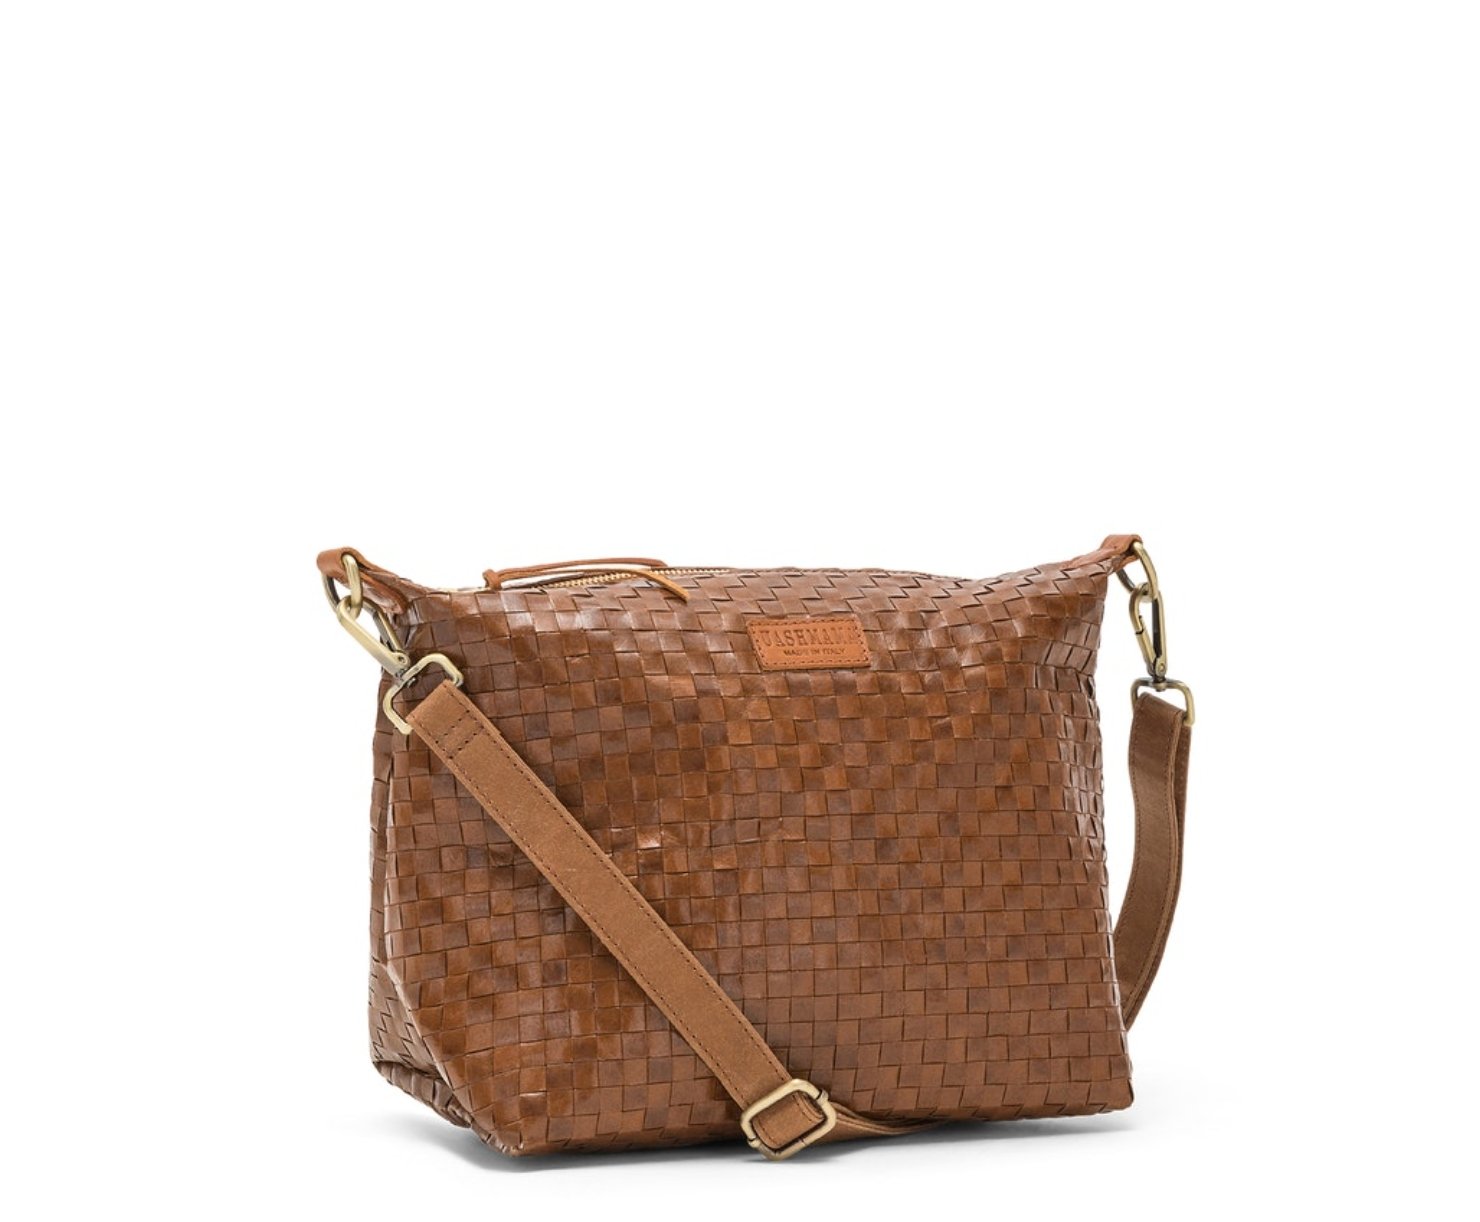 A brown washable paper woven handbag is shown with a zip closure, a UASHMAMA logo, and a brown washable paper long strap with brass hardware.